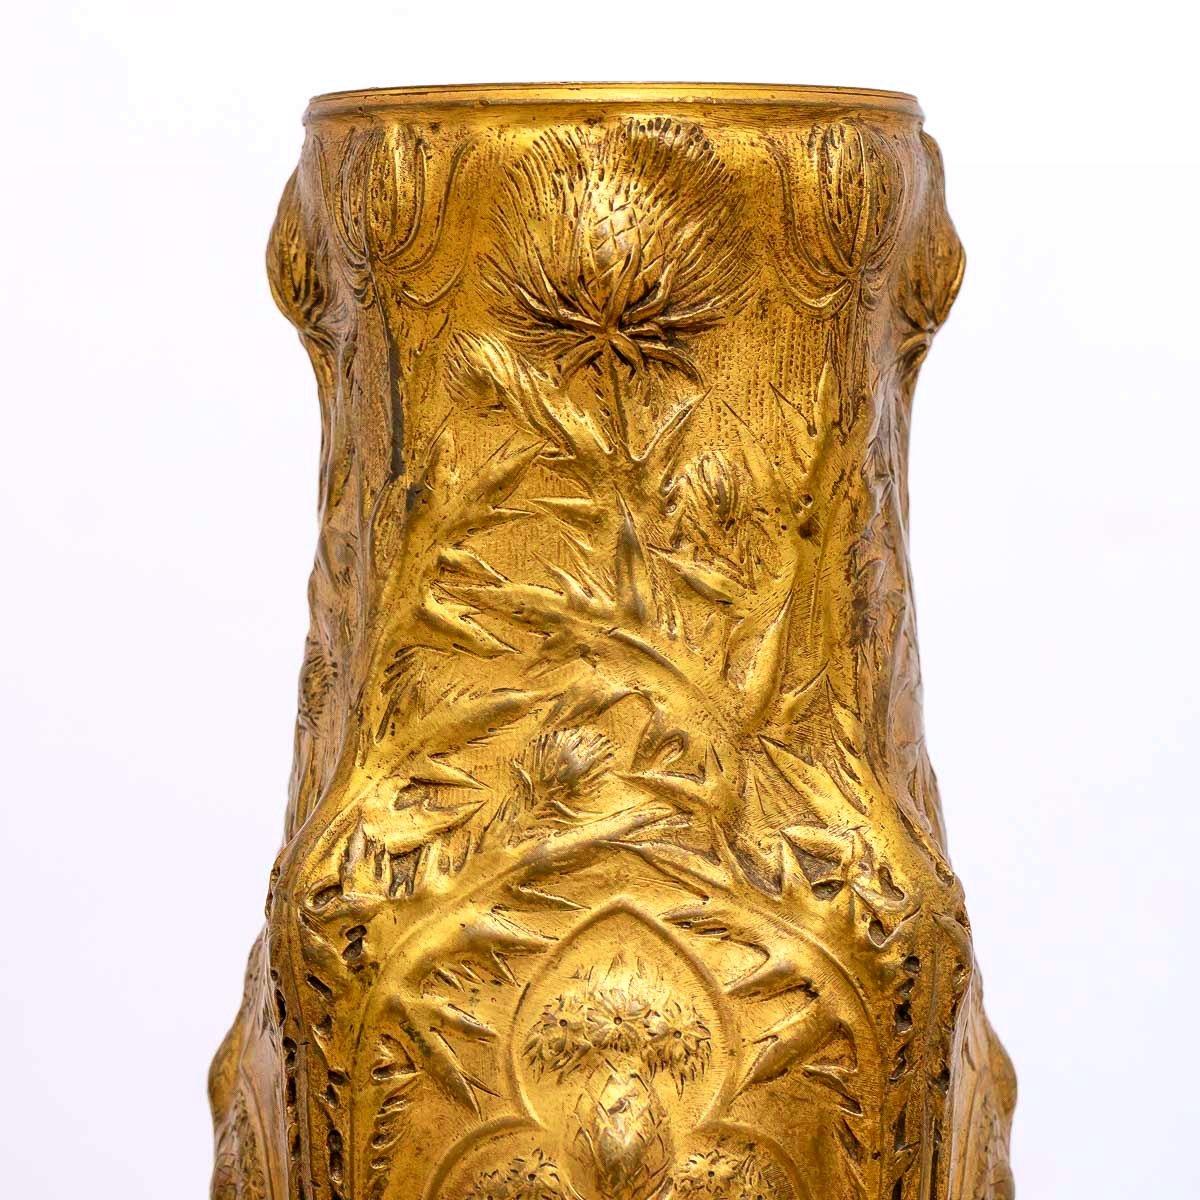 Charming baluster vase in gilded bronze, very beautiful casting signed F. BARBEDIENNE.
The decoration proudly bearing thistles of Lorraine is magnified by an octagonal base in French marble, green of the Alps.

Period : End of XIXth century - Art